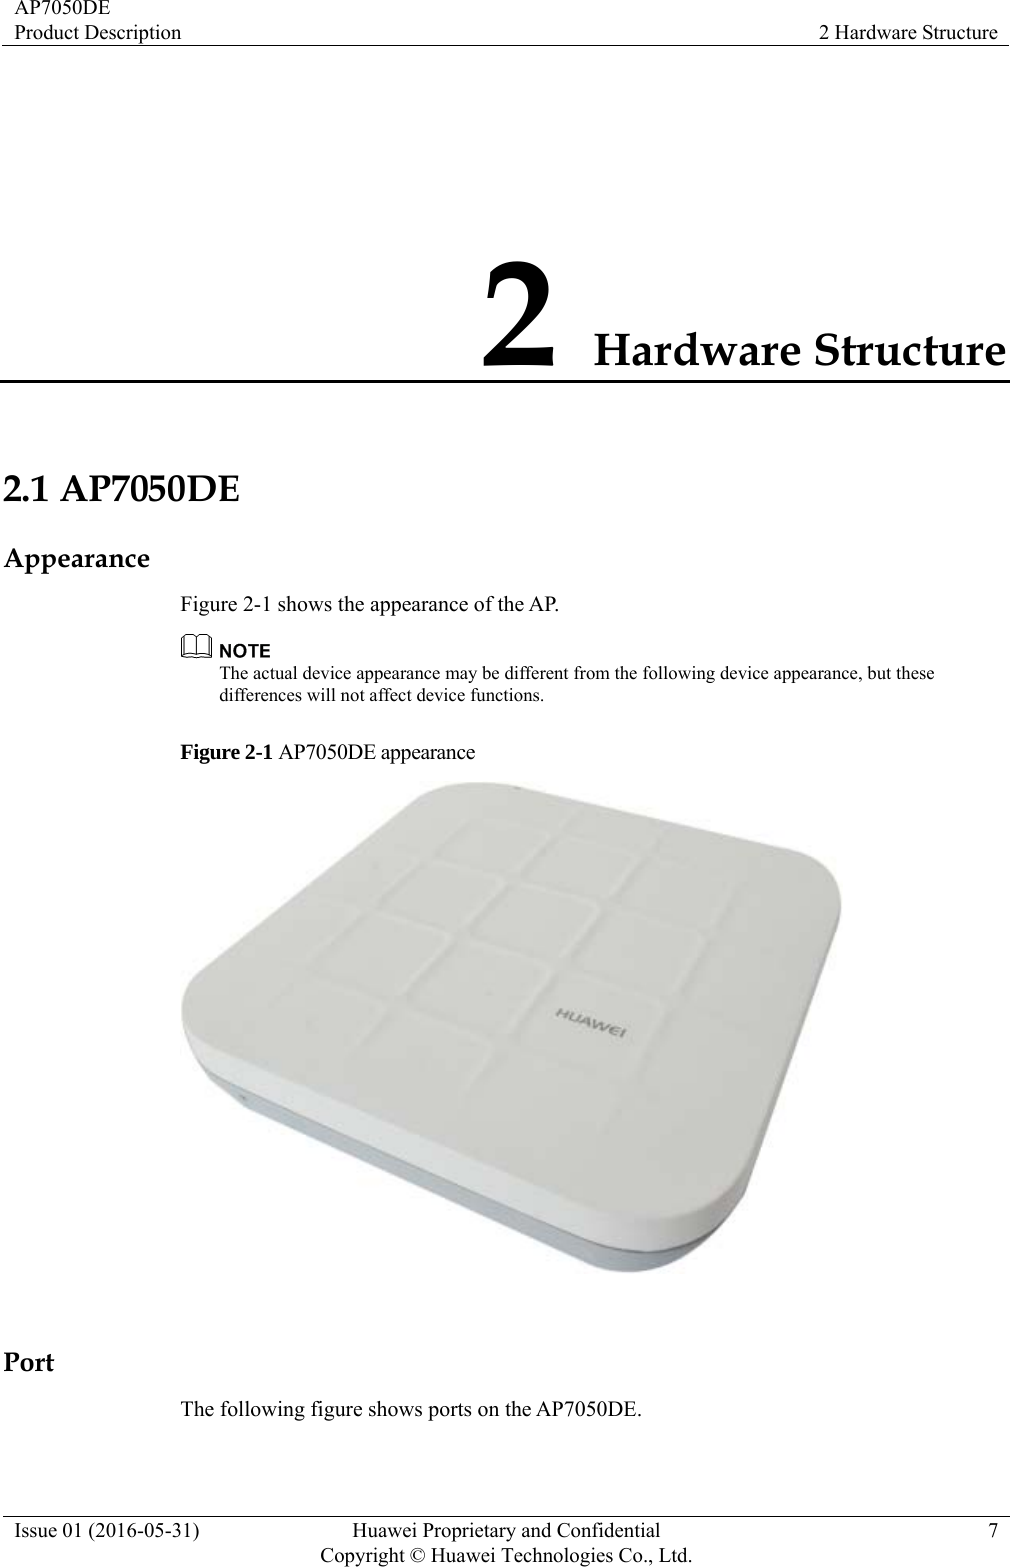 AP7050DE Product Description  2 Hardware Structure Issue 01 (2016-05-31)  Huawei Proprietary and Confidential         Copyright © Huawei Technologies Co., Ltd.7 2 Hardware Structure 2.1 AP7050DE Appearance Figure 2-1 shows the appearance of the AP.  The actual device appearance may be different from the following device appearance, but these differences will not affect device functions. Figure 2-1 AP7050DE appearance   Port The following figure shows ports on the AP7050DE. 